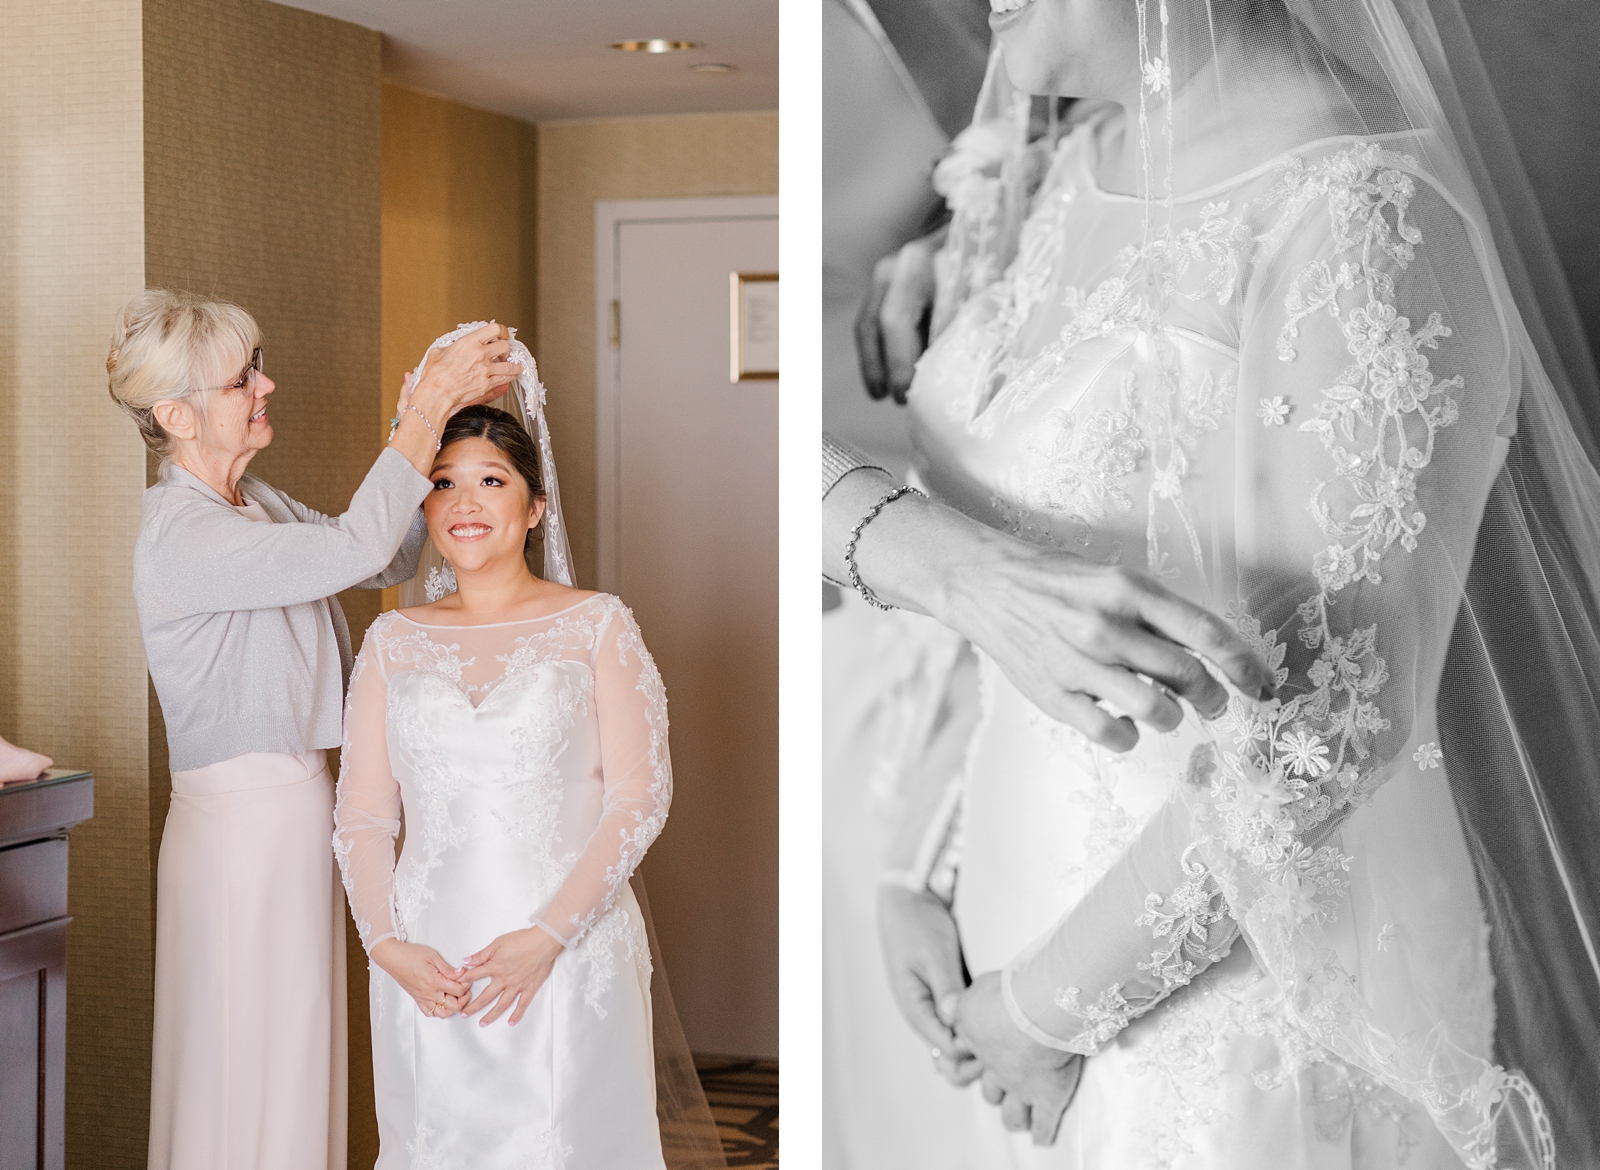 Bride Getting Ready at Richmond Omni Hotel Intimate Wedding. Photography by Virginia Intimate Wedding Photographer Kailey Brianne Photography.
